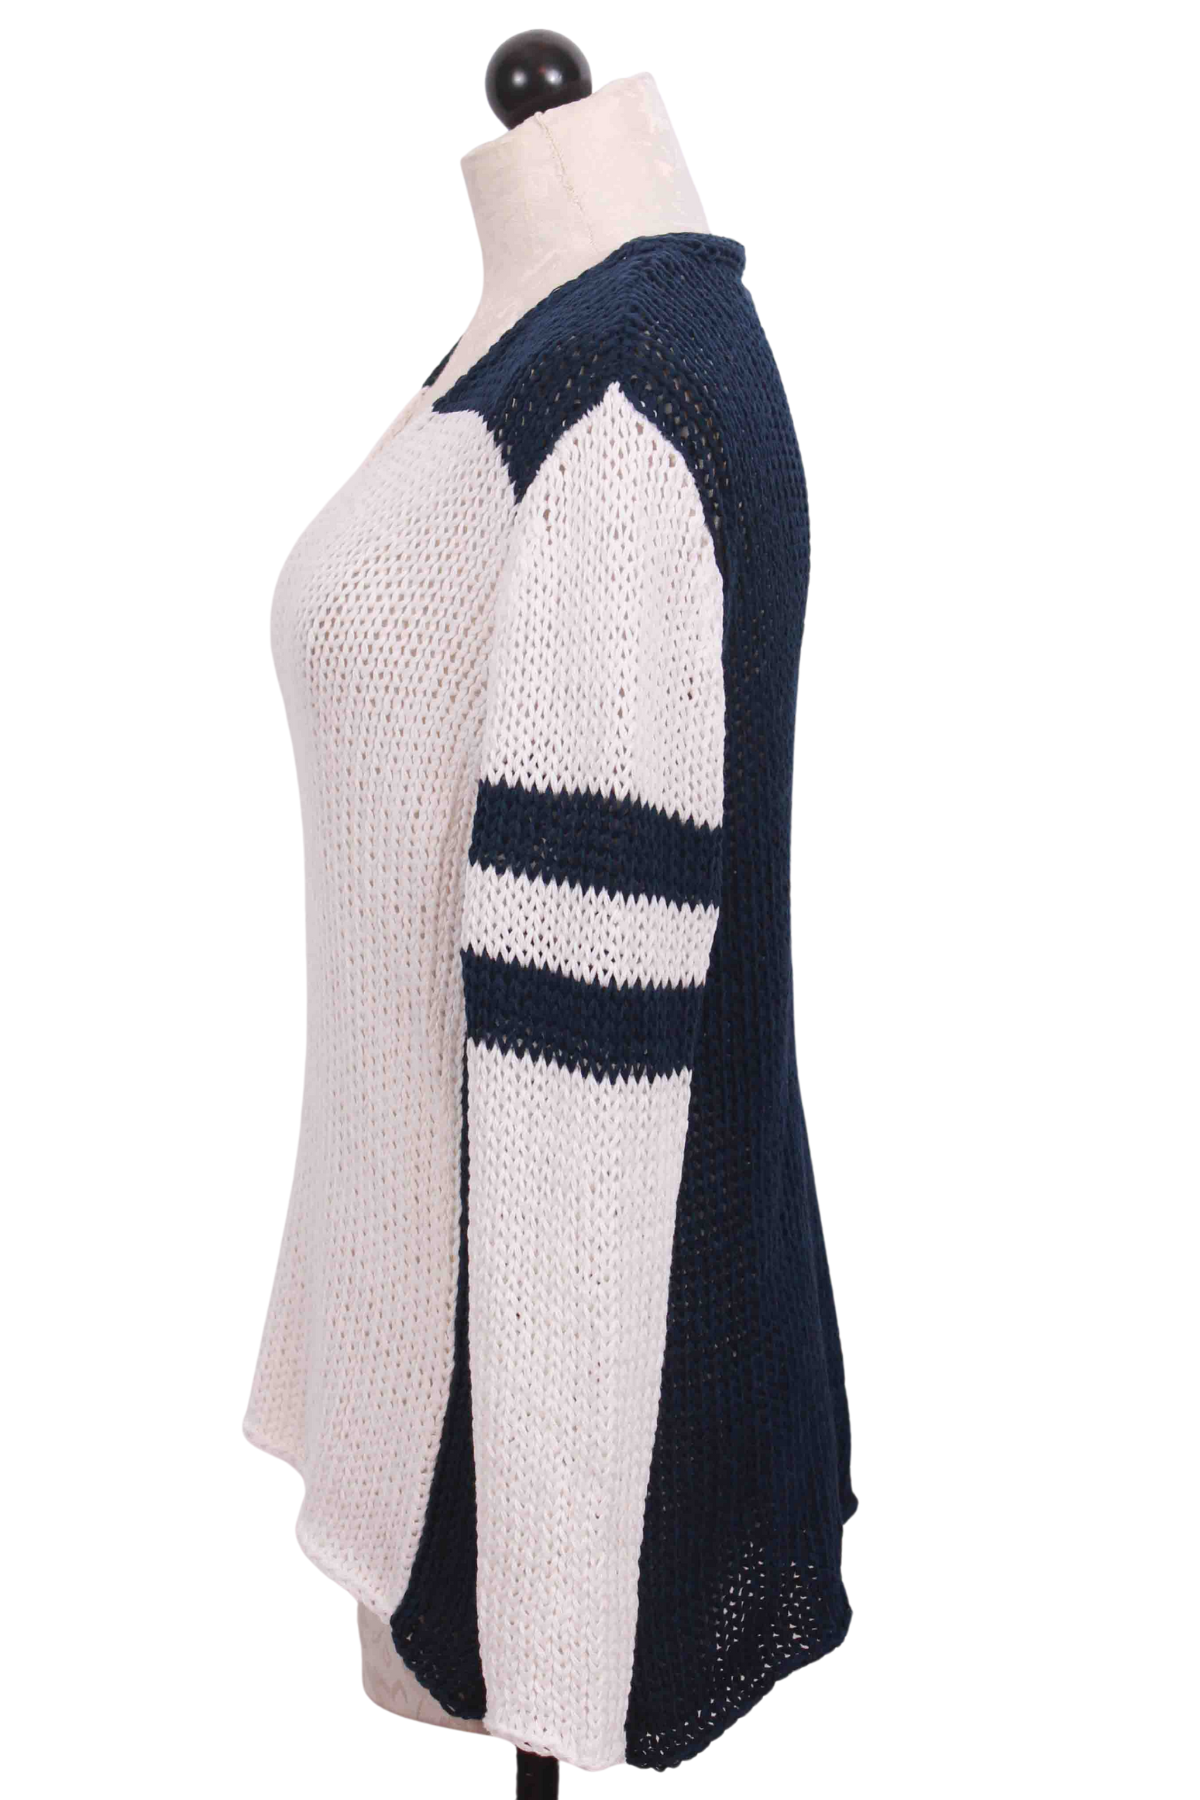 side view of Breaker White/Highline Blue Colorblock Maui V Sweater by Wooden Ships